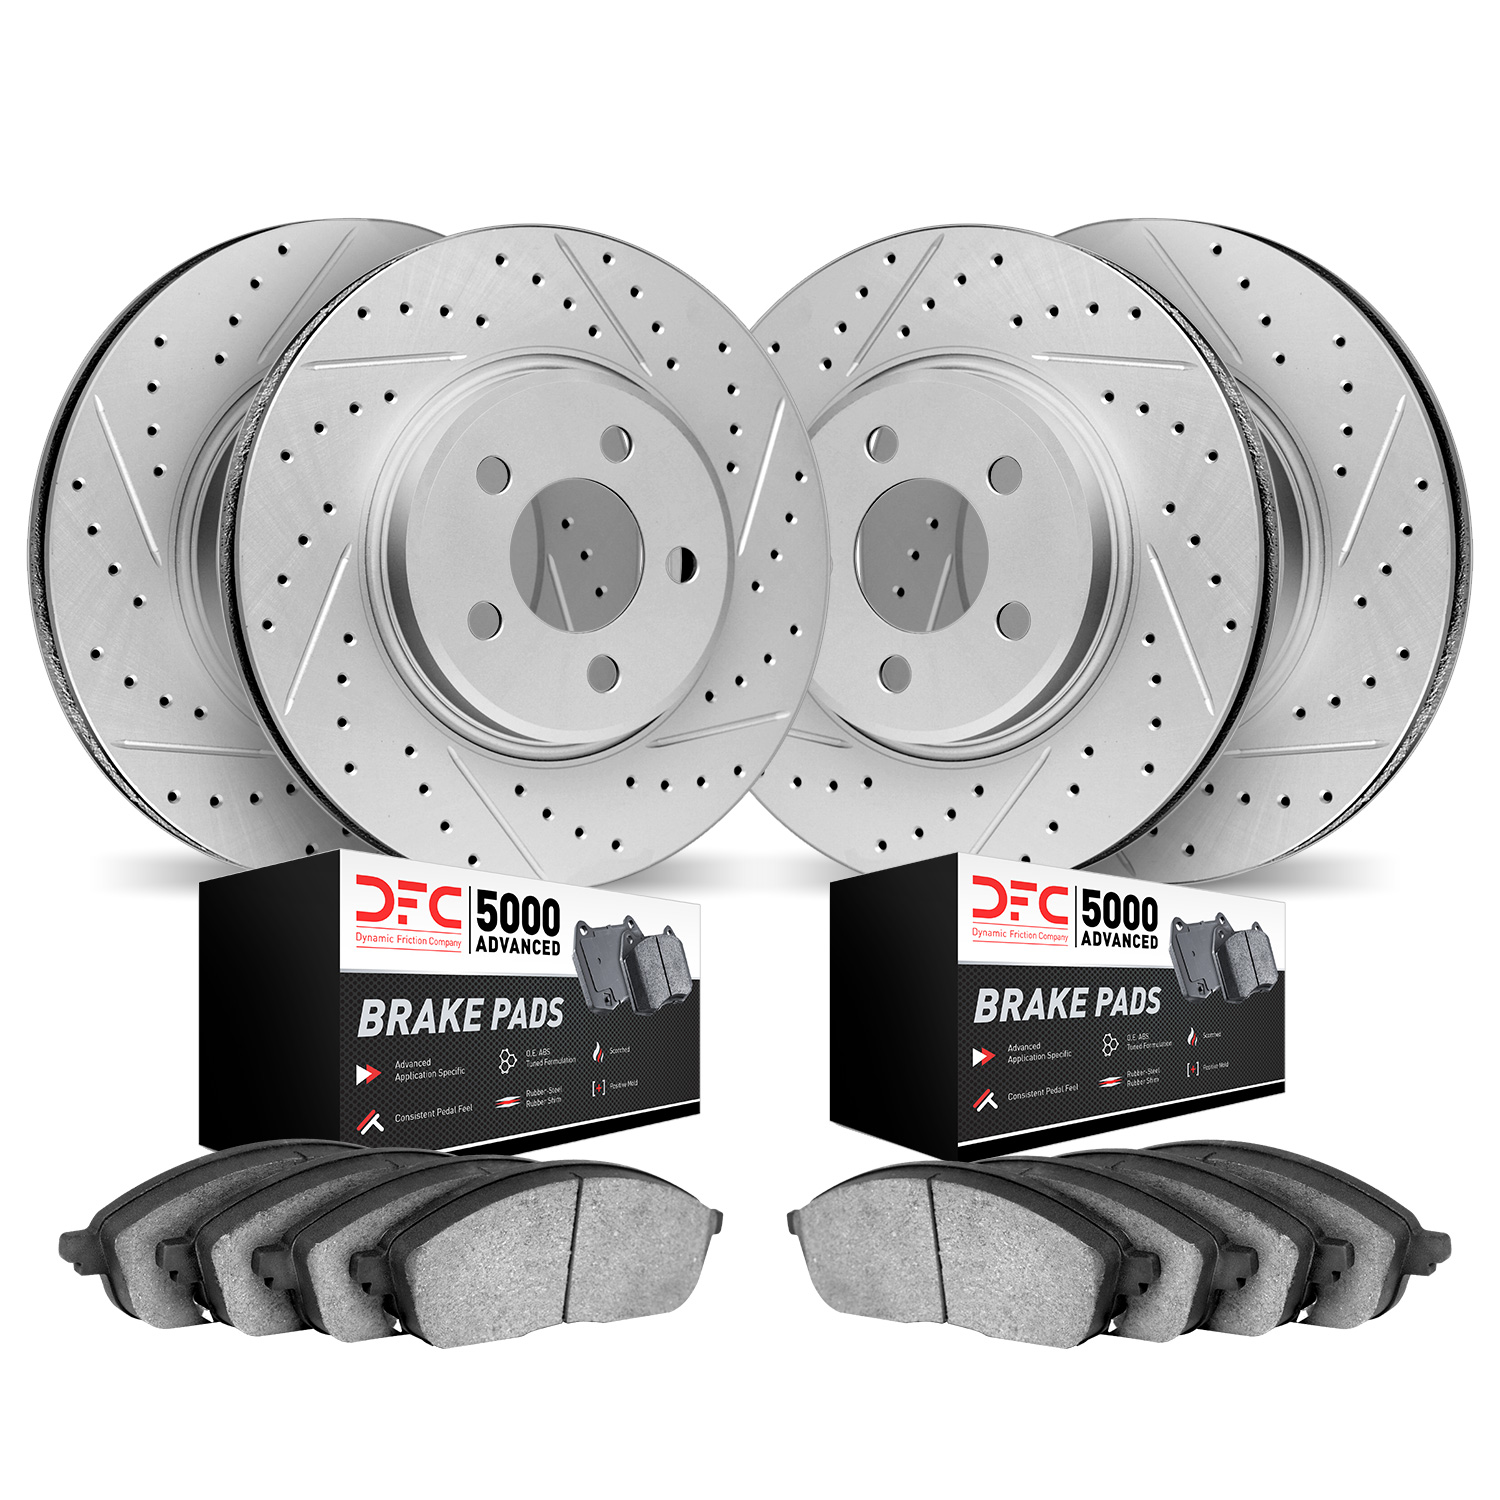 2504-31071 Geoperformance Drilled/Slotted Rotors w/5000 Advanced Brake Pads Kit, 2016-2018 BMW, Position: Front and Rear